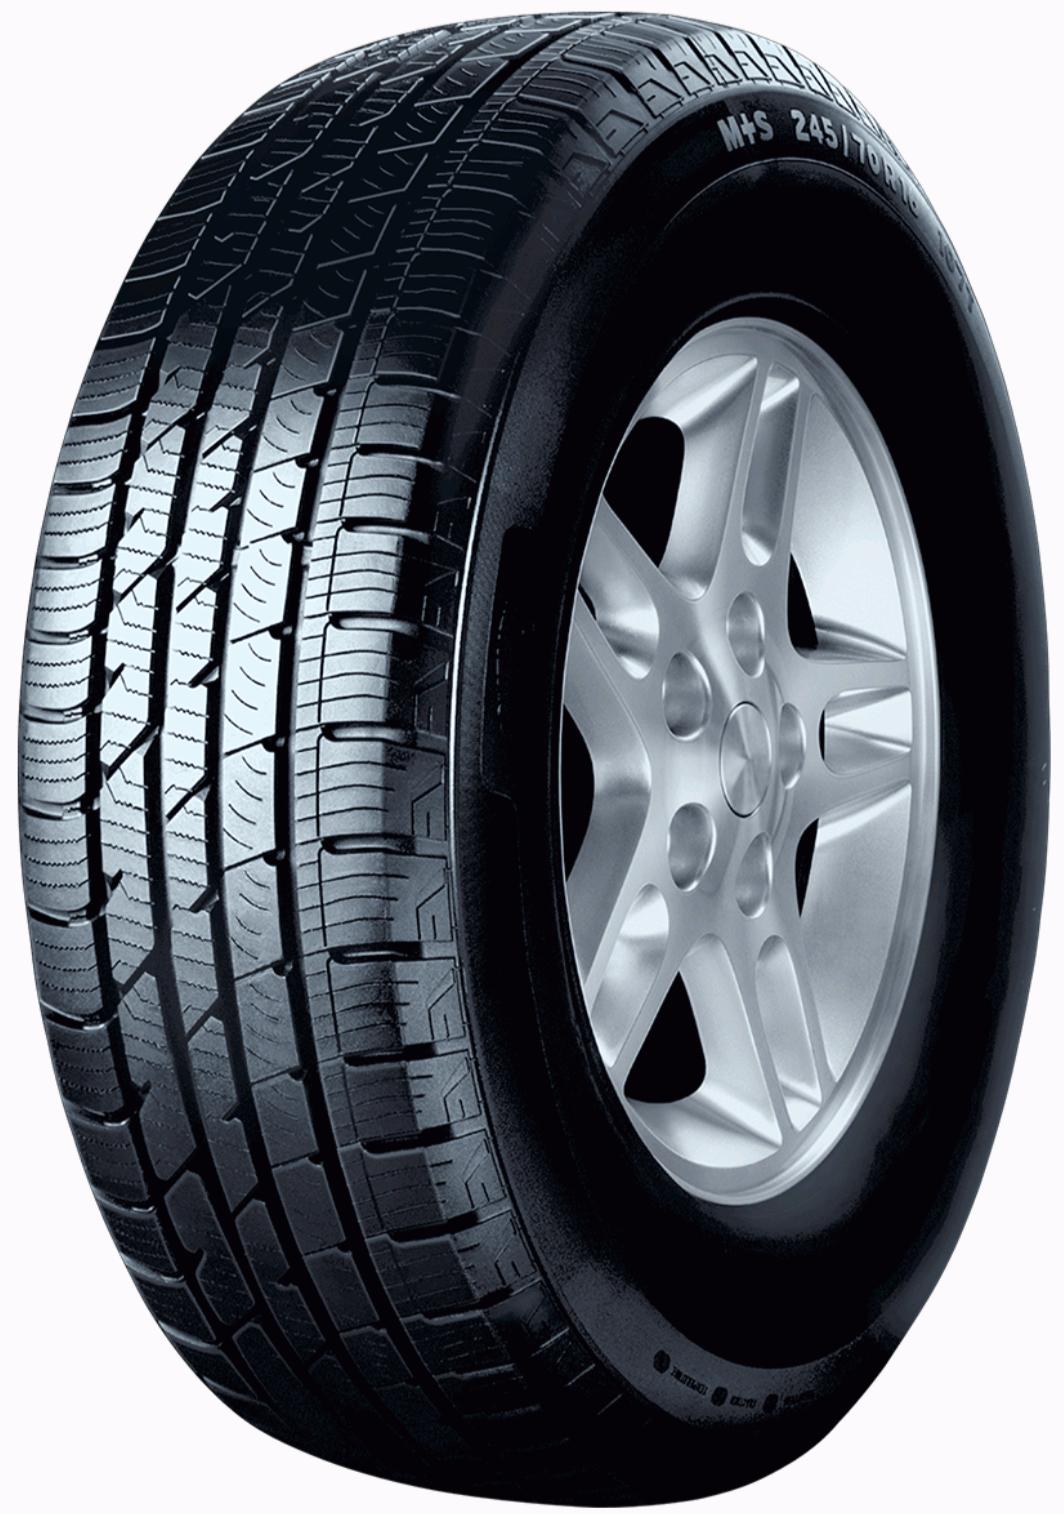 Continental ContiCrossContact LX - Tyre Reviews and Tests